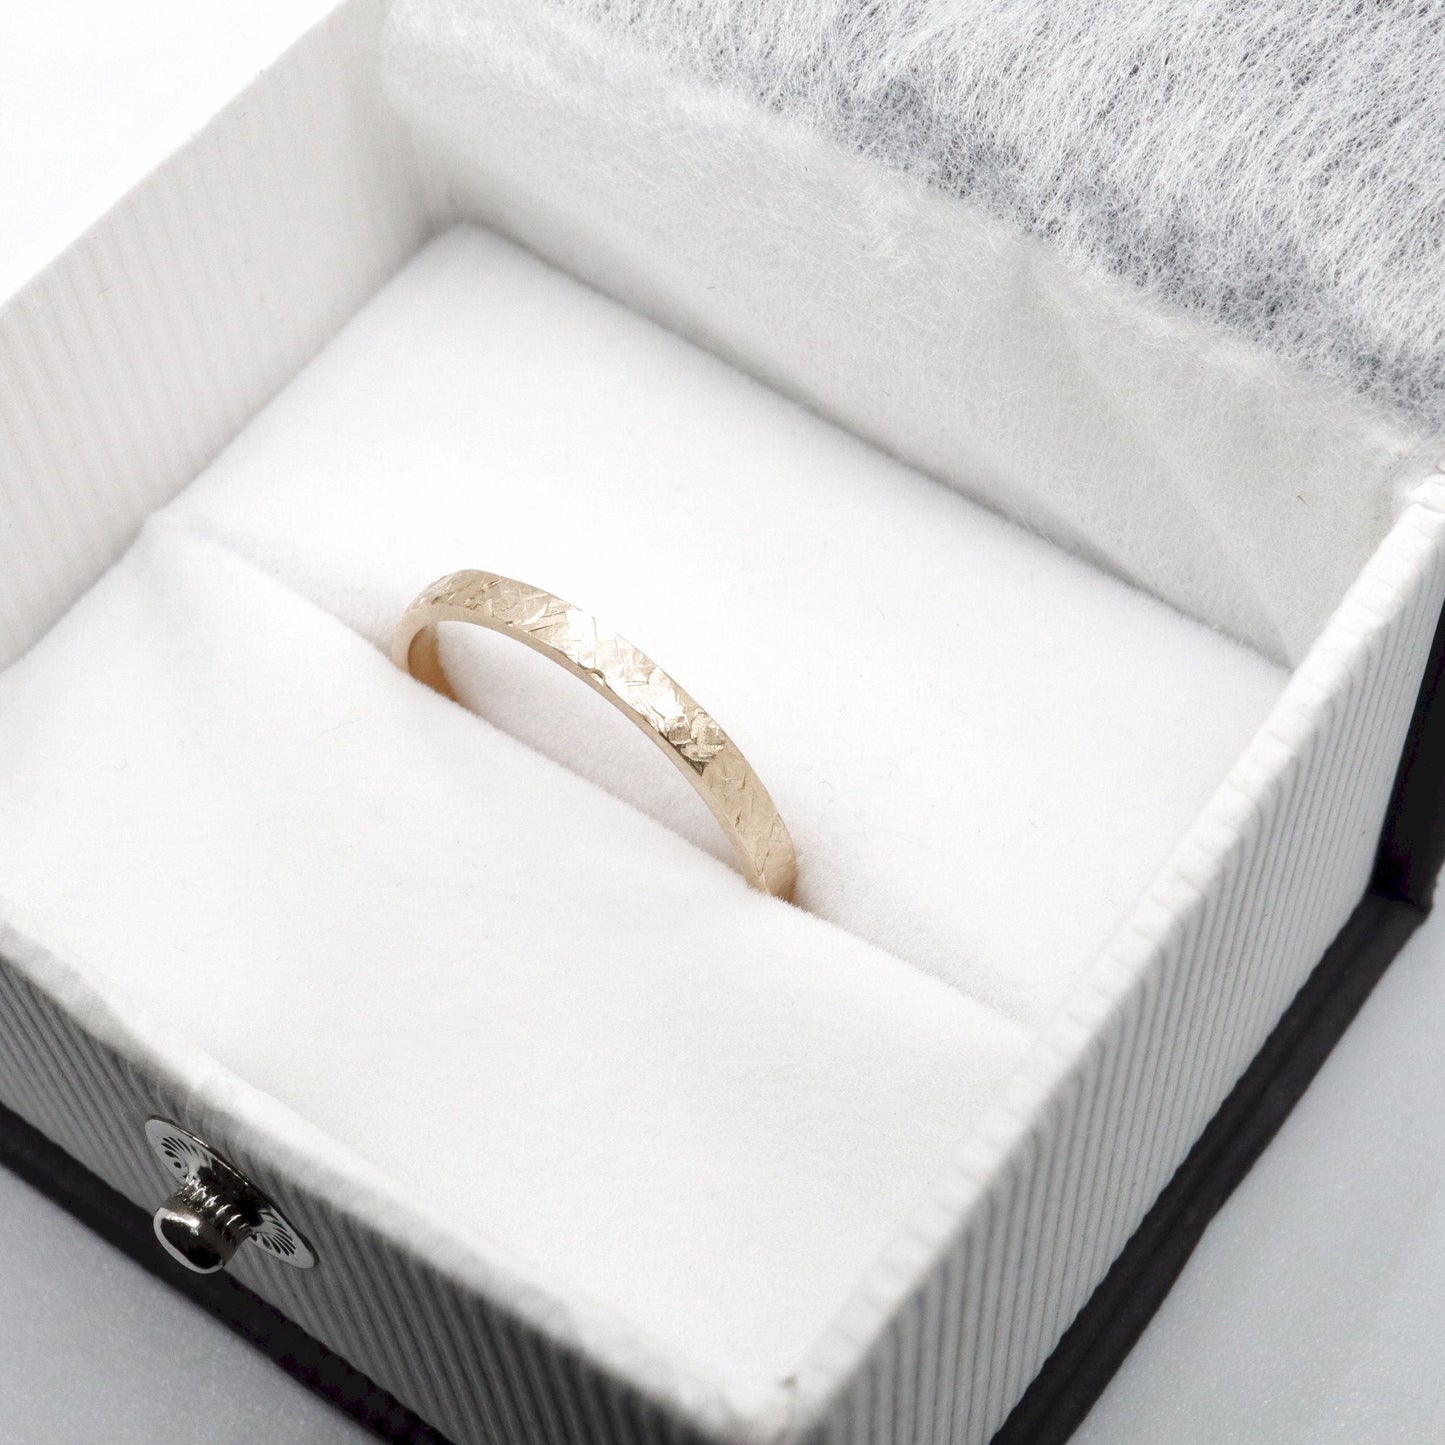 Two 4mm 9ct yellow gold Kendal wedding rings one size I and one size K